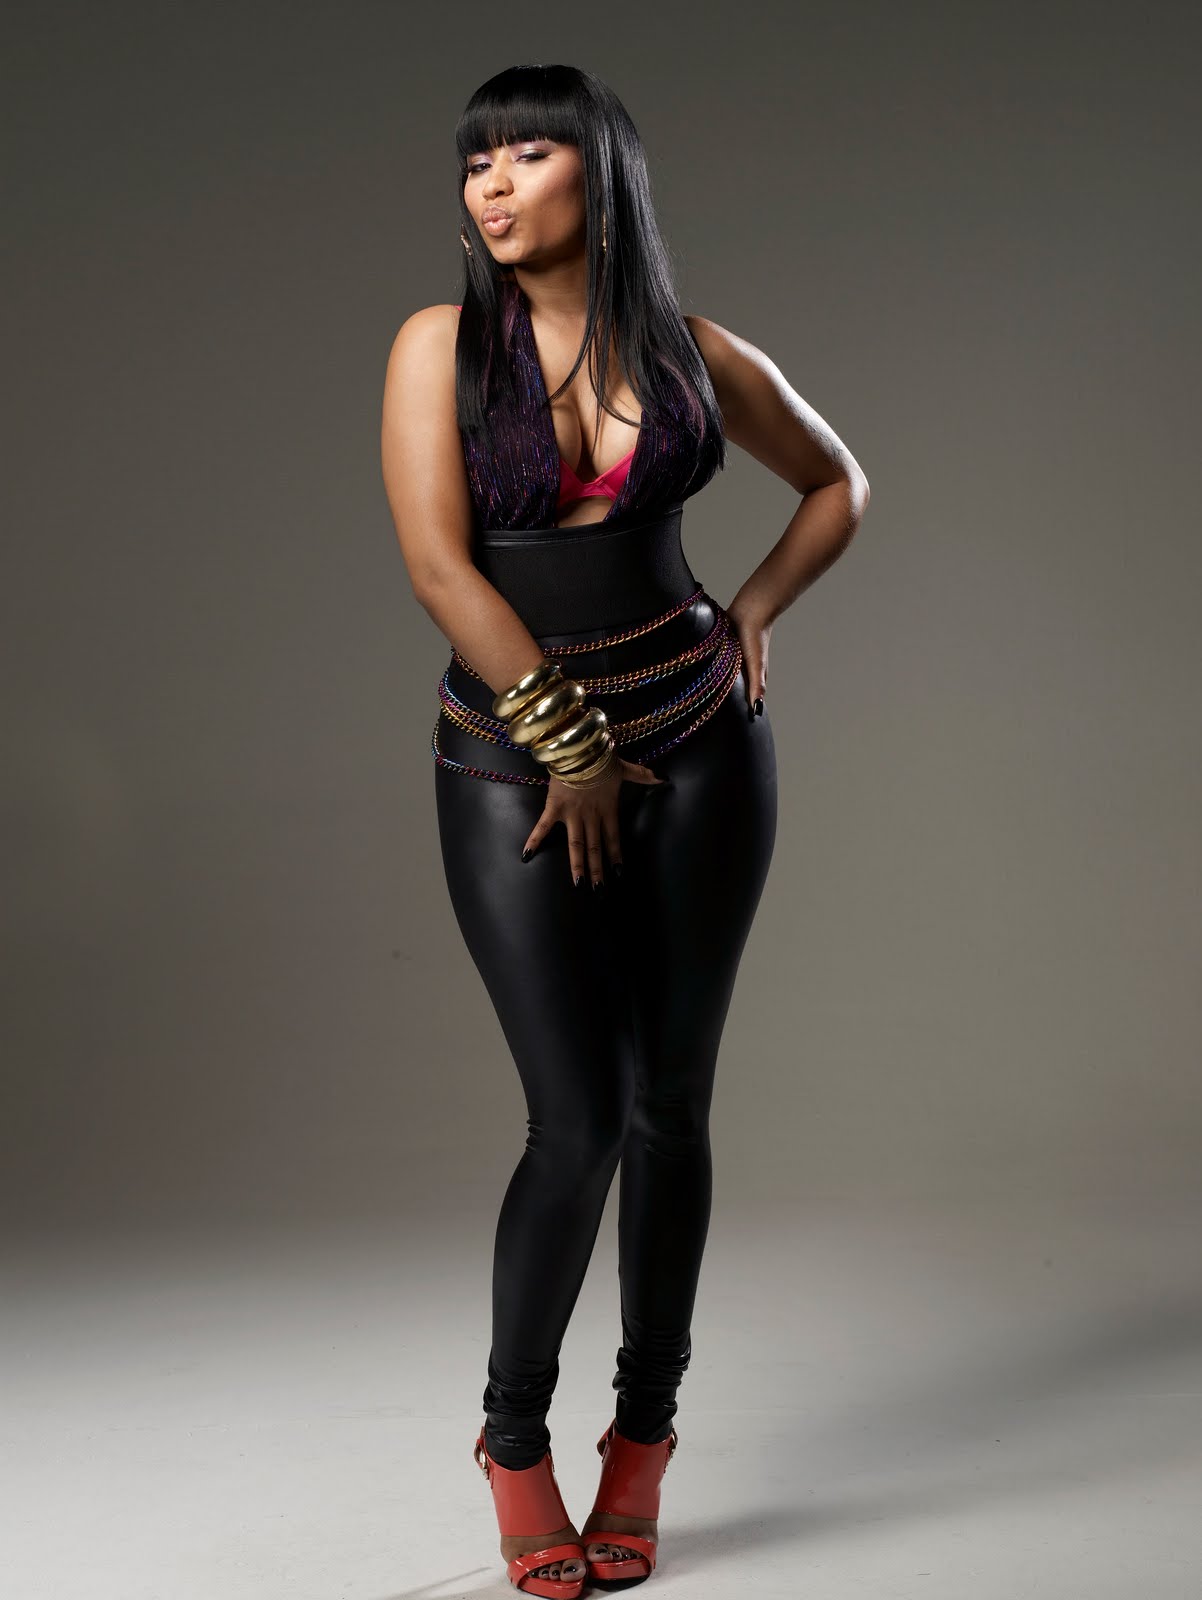 Nicki Minaj HD Wallpapers Download Free Wallpapers in HD for your